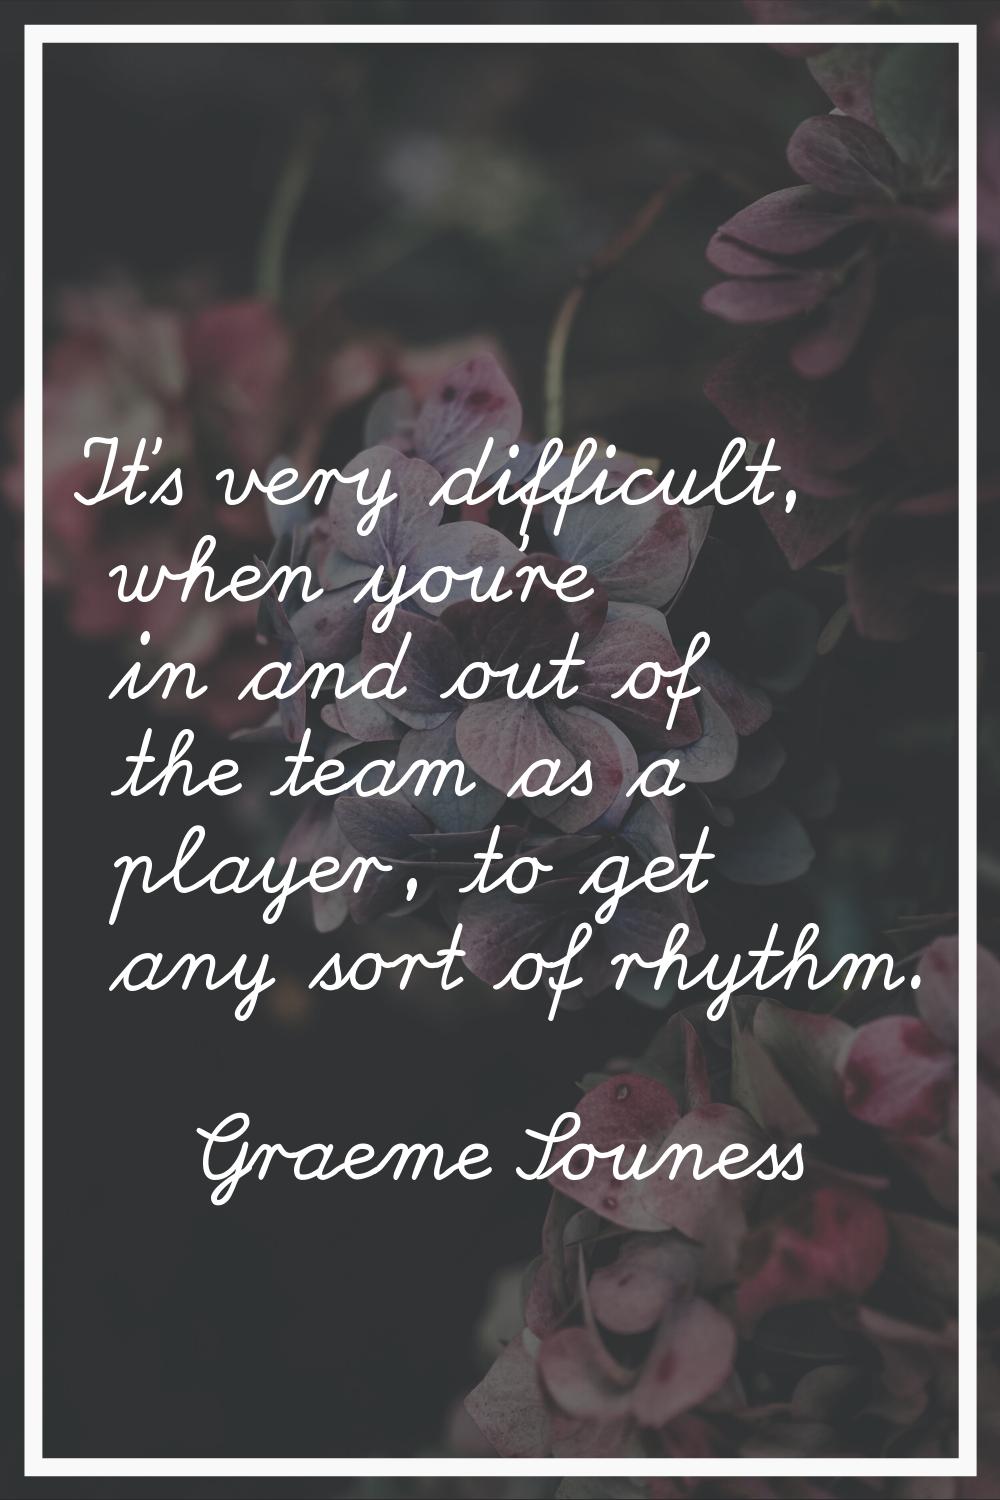 It's very difficult, when you're in and out of the team as a player, to get any sort of rhythm.